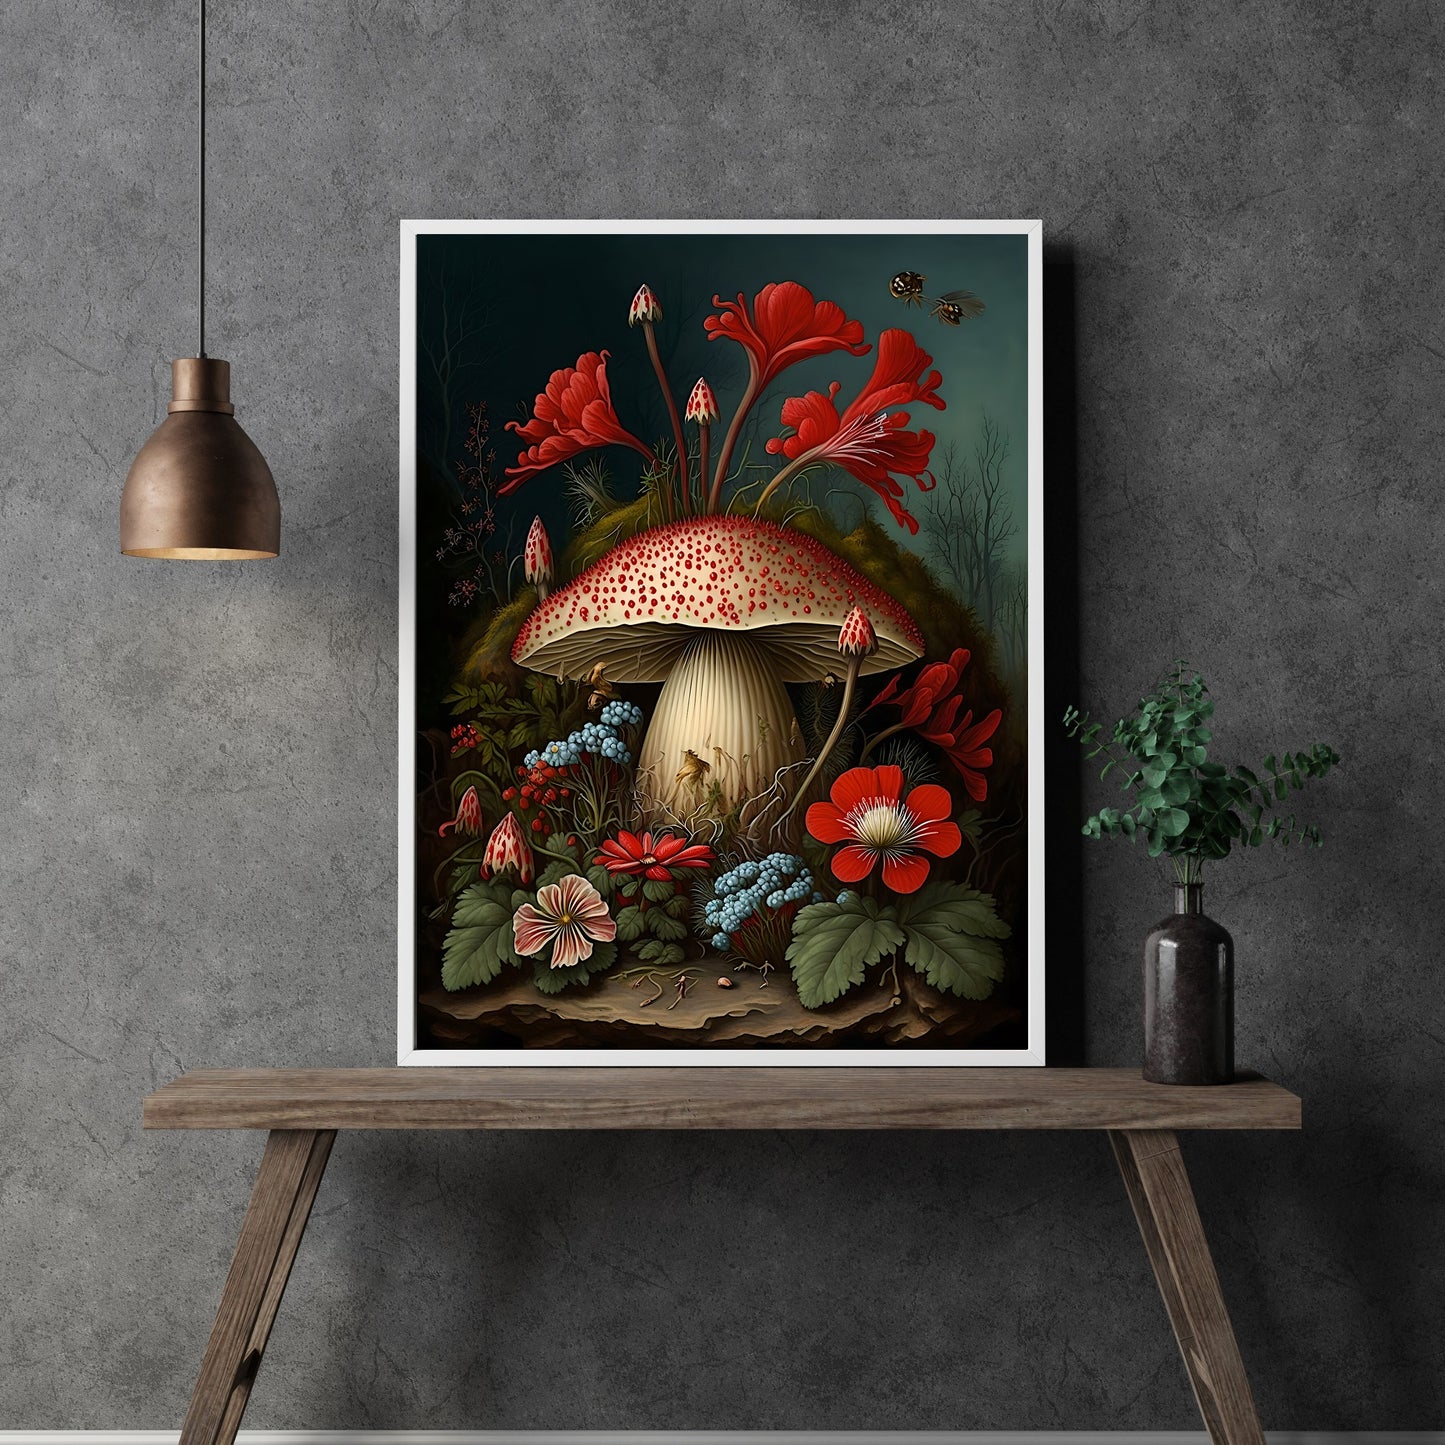 Mushrooms and Flowers in Woodland Wall Art, Dark Academia, Goblincore, Botanical Decor, Witchy Gothic Cottagecore, Mushroom Art Paper Poster Prints